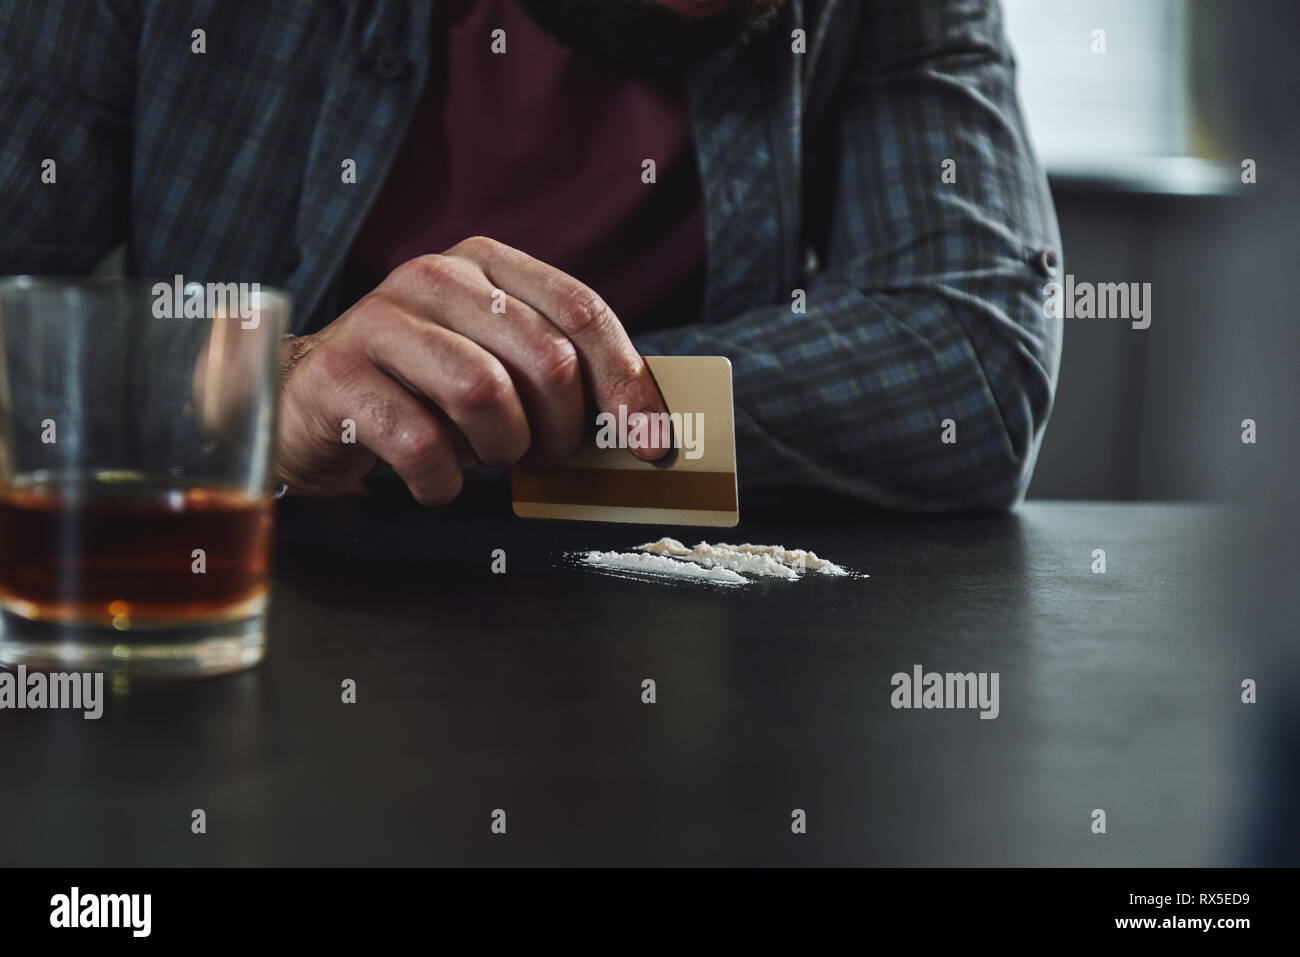 Depressed man sits at the table, preparing to snort a line of cocaine. He is suffering from problems at work and troubles in relationships. A glass of Stock Photo